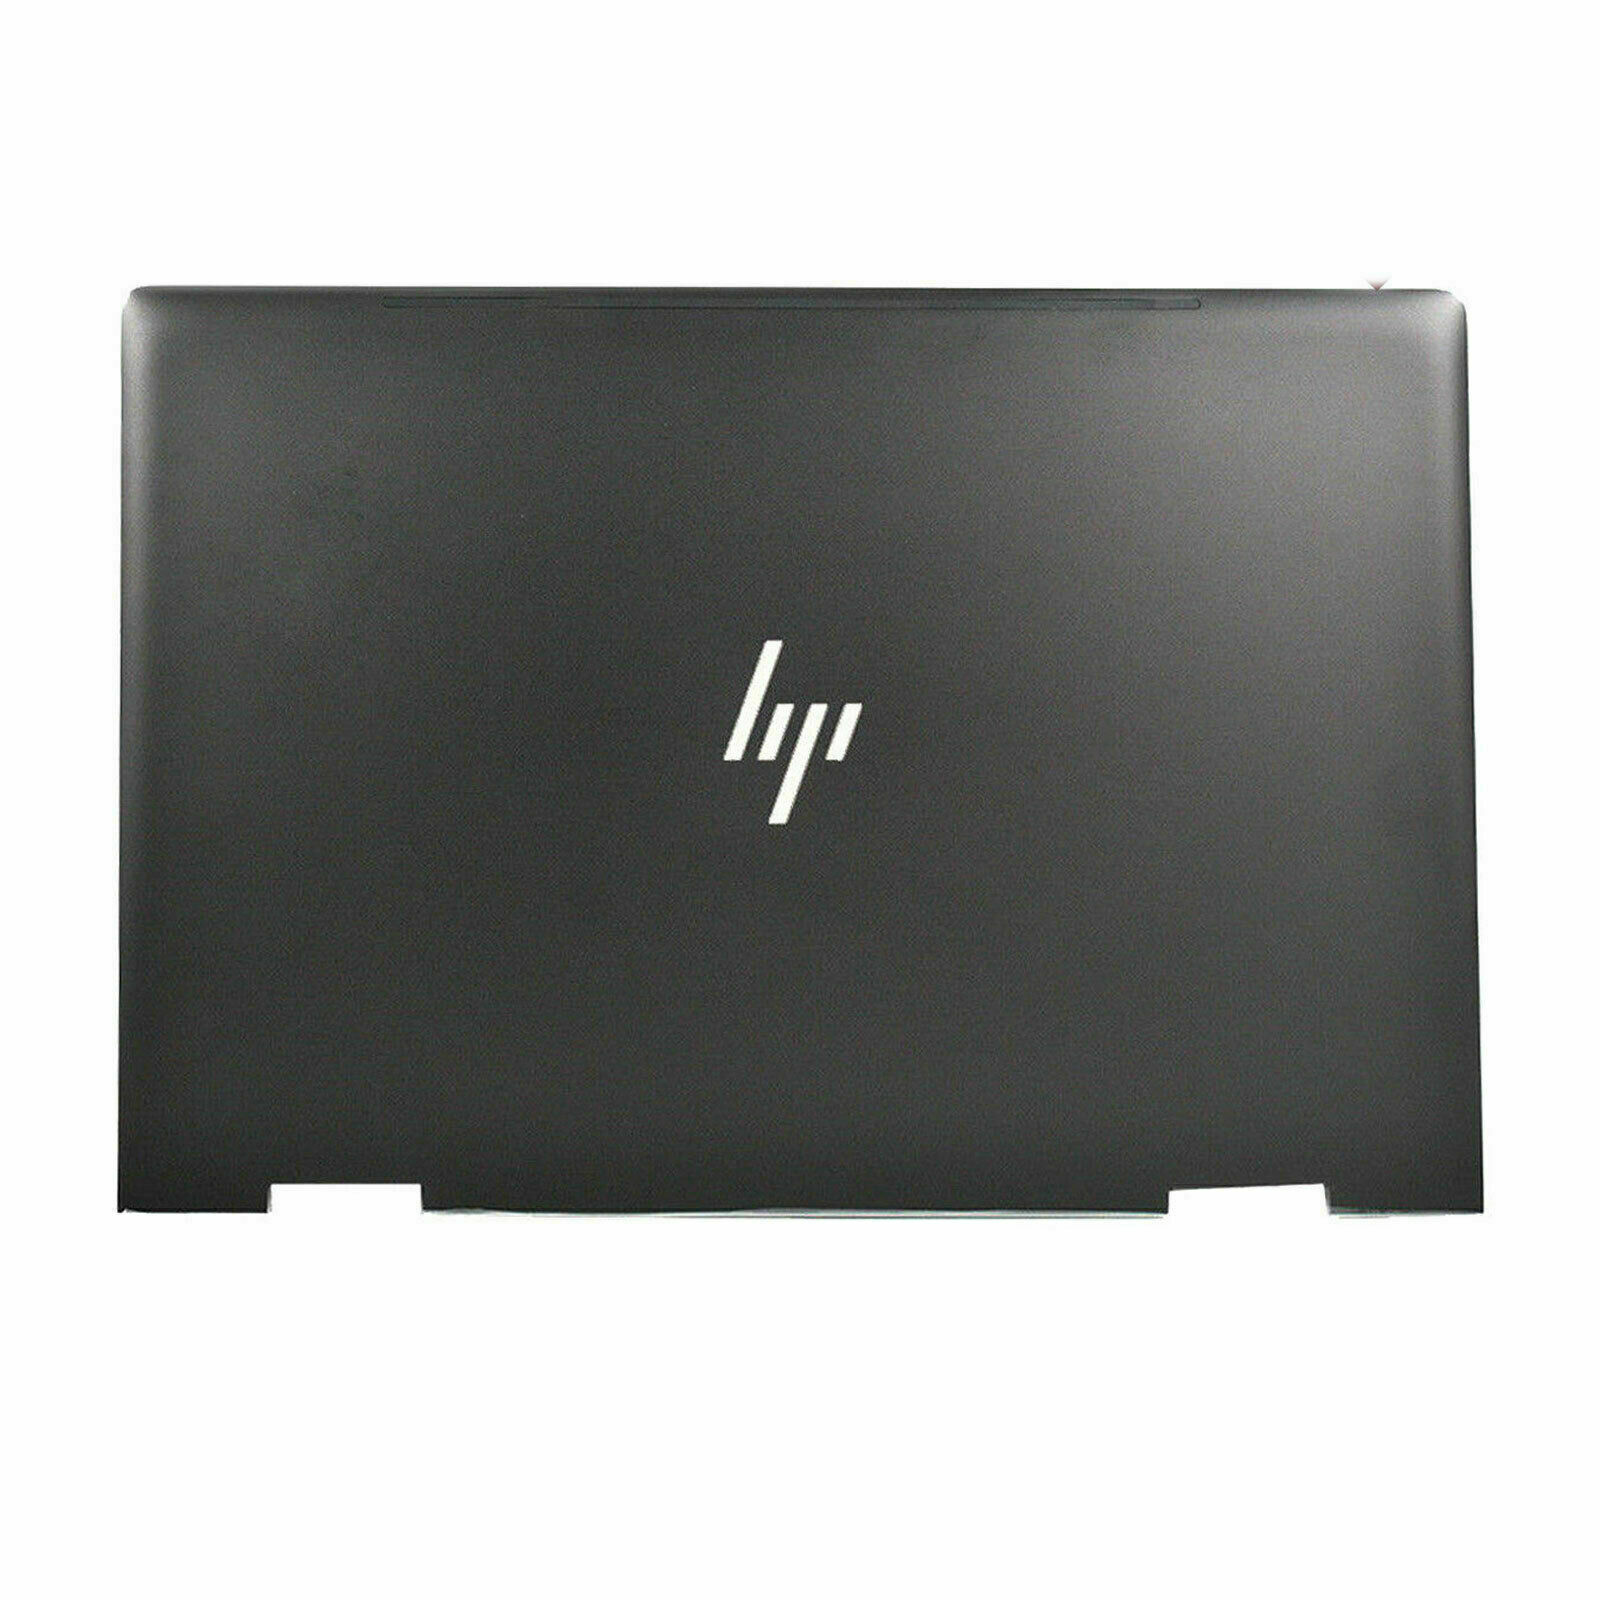 New Back Case Cover For HP ENVY X360 15-BP 15M-BP 15M-BQ Gray 15.6 924321-001. Available Now for 45.50